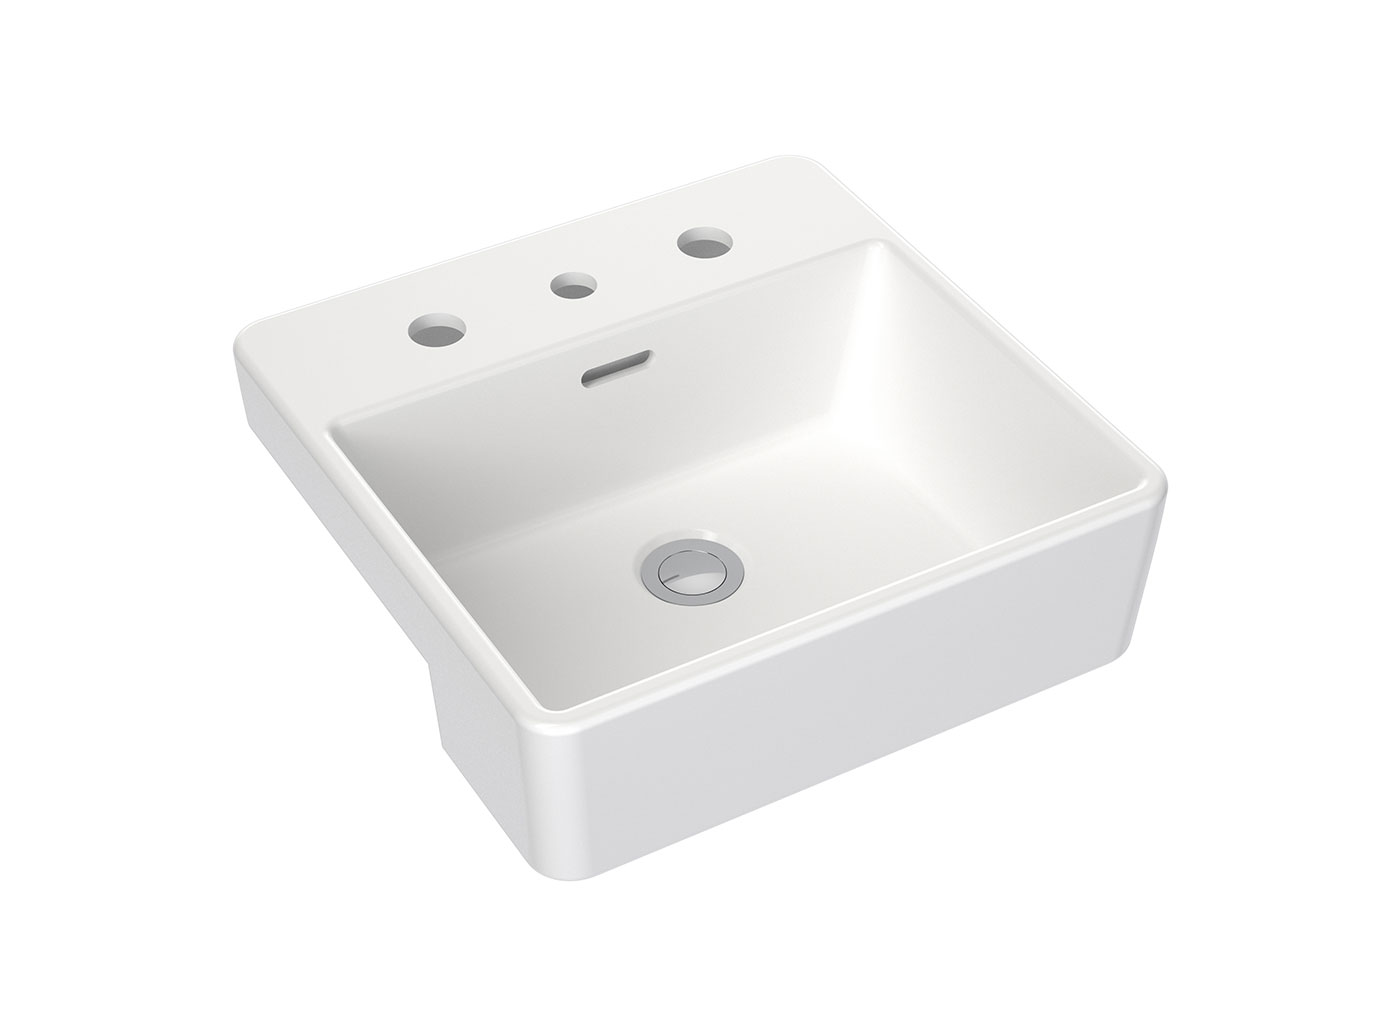 Trying to make your small bathroom look big? Check out Clark's semi recessed basins.